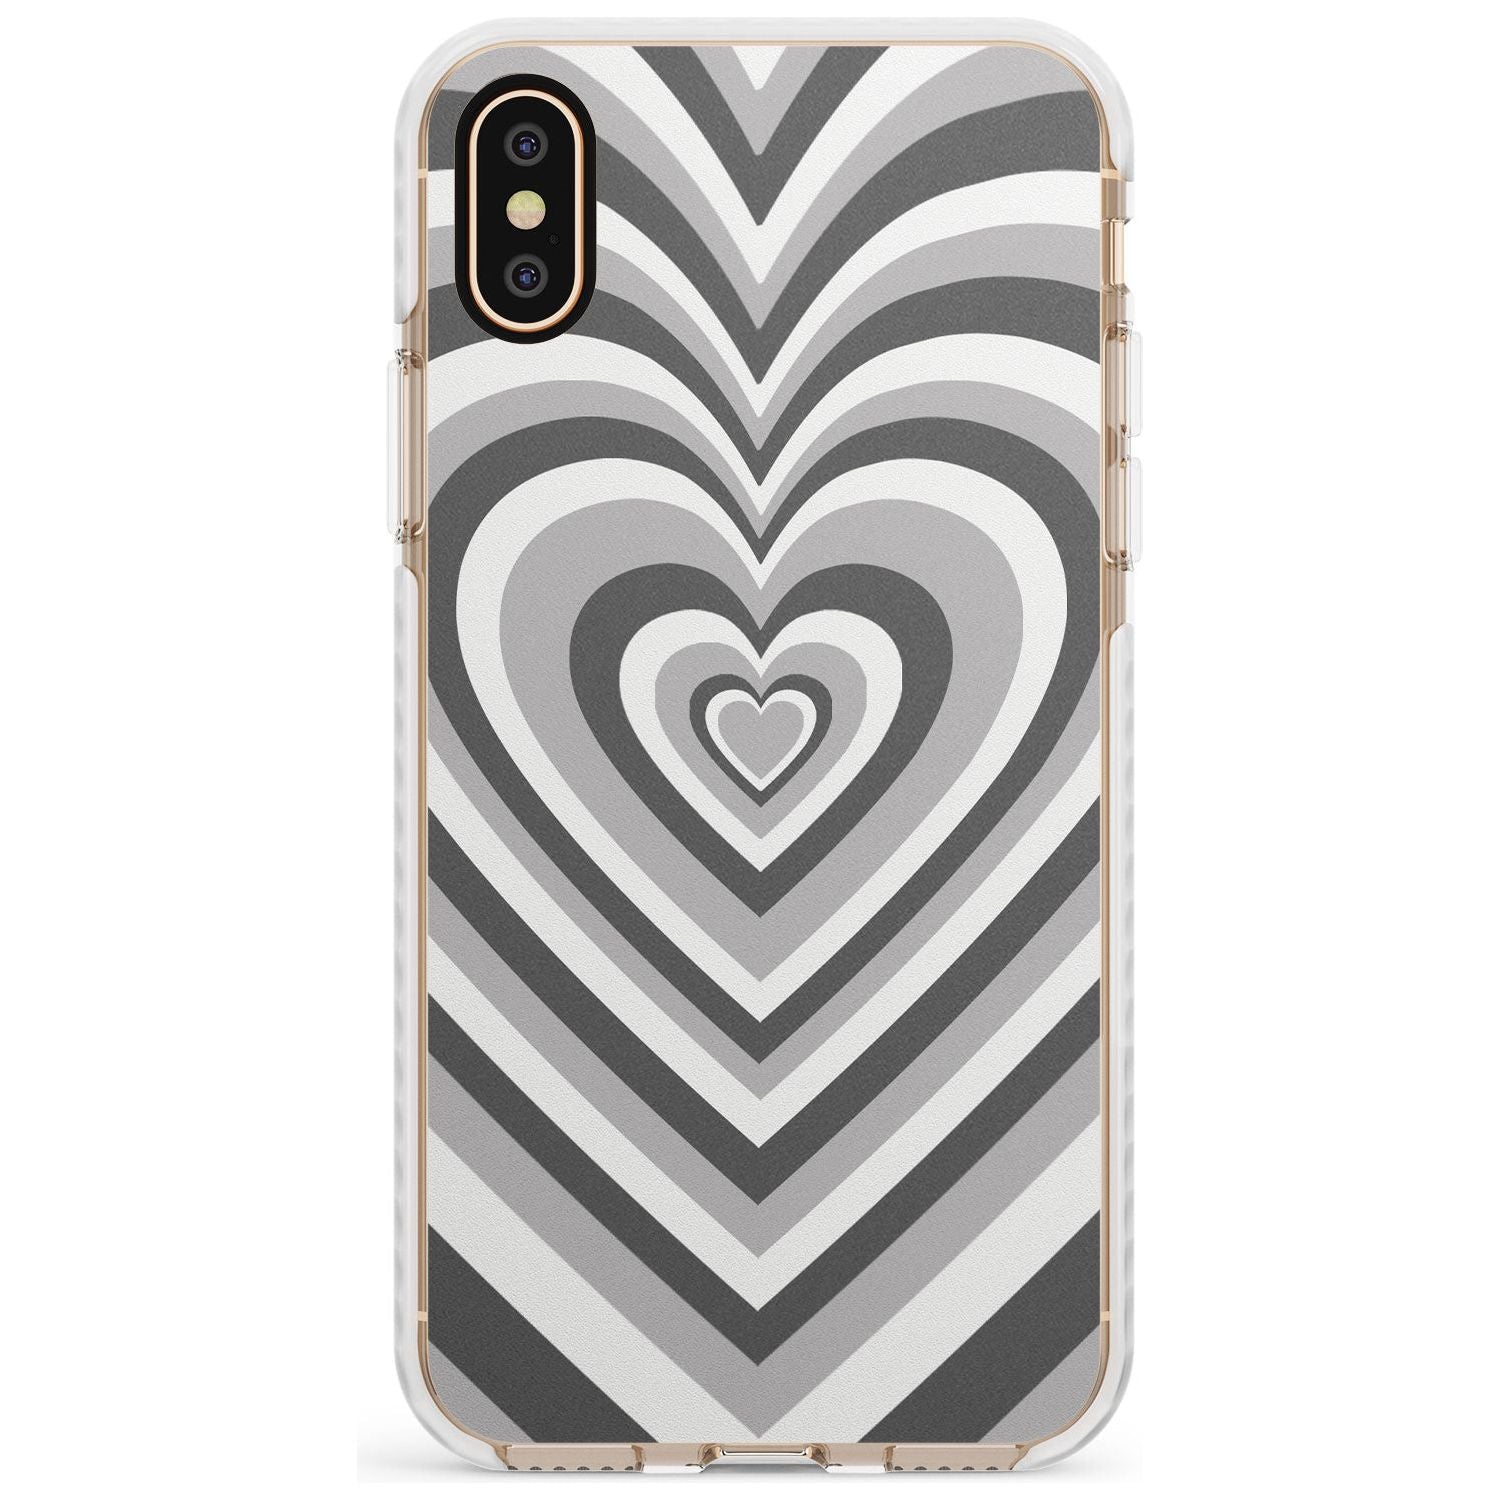 Monochrome Heart Illusion Impact Phone Case for iPhone X XS Max XR